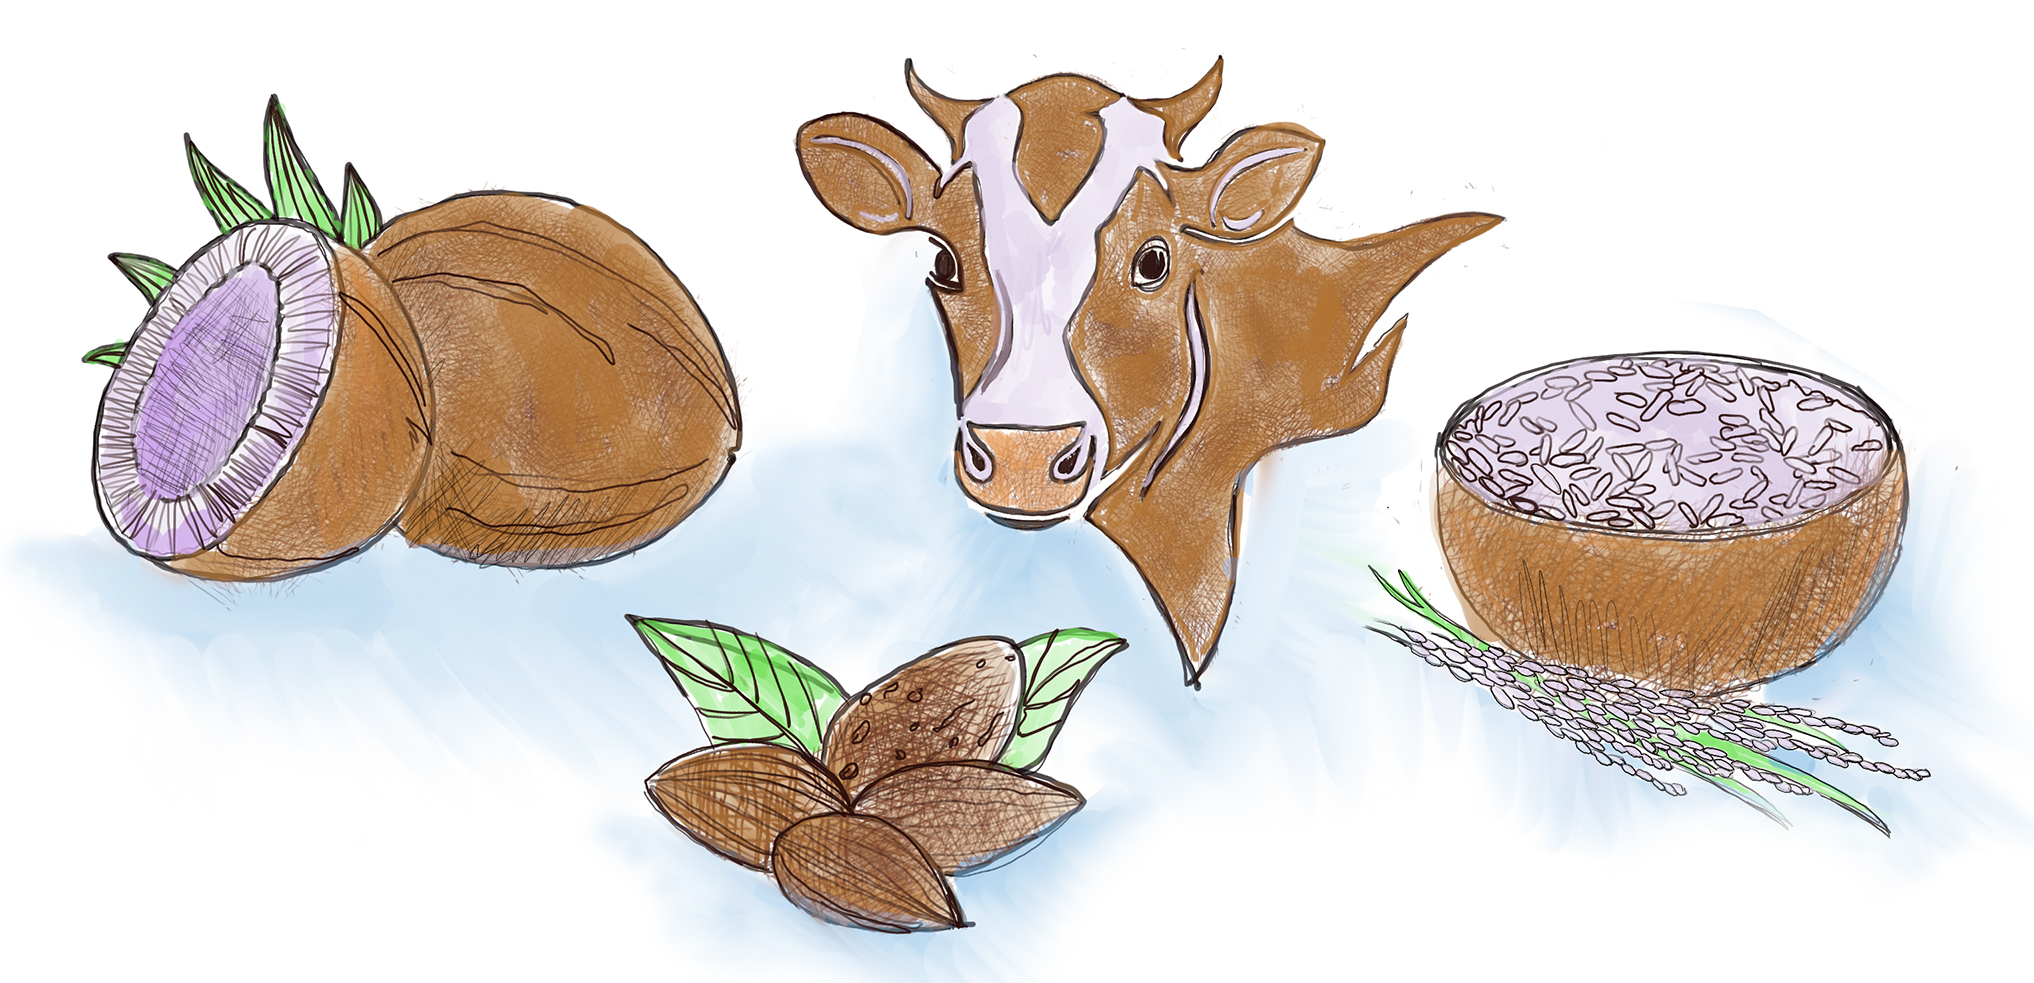 Products sold as milk come from coconuts, almonds, cows and rice.